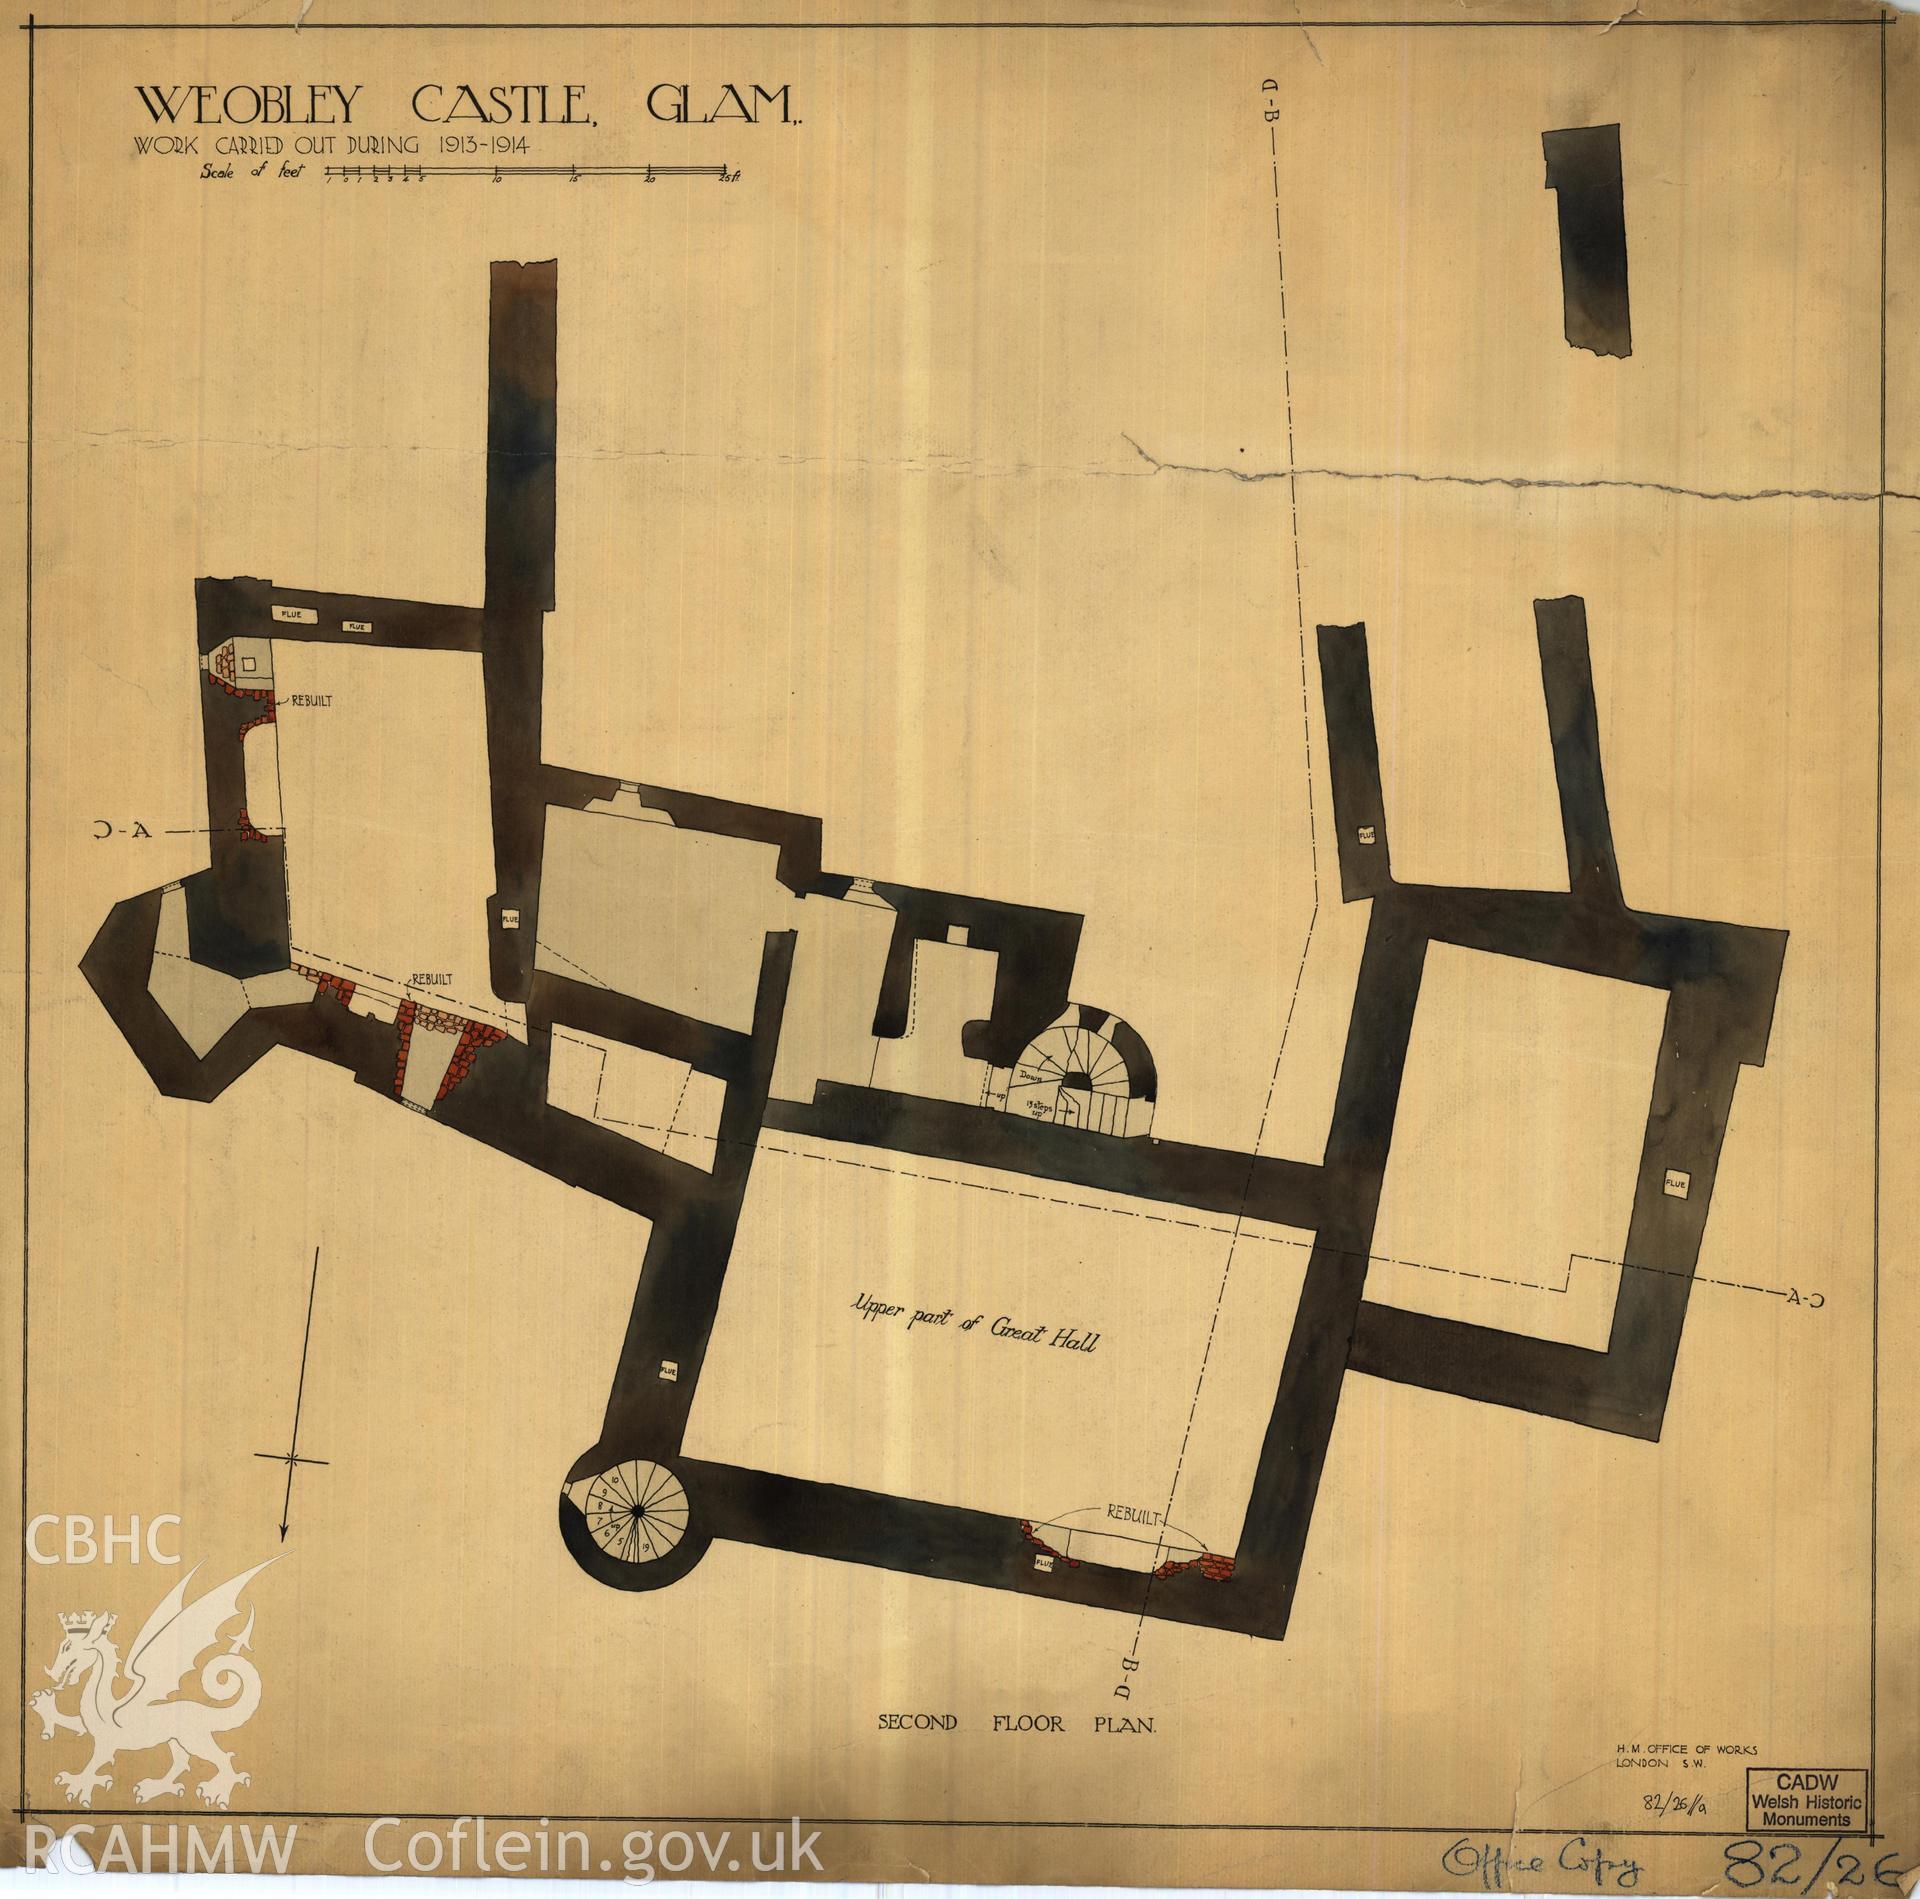 Cadw guardianship monument drawing of Weobley Castle. Top floor plan + consolidations. Cadw Ref. No:82/26. Scale 1:48.